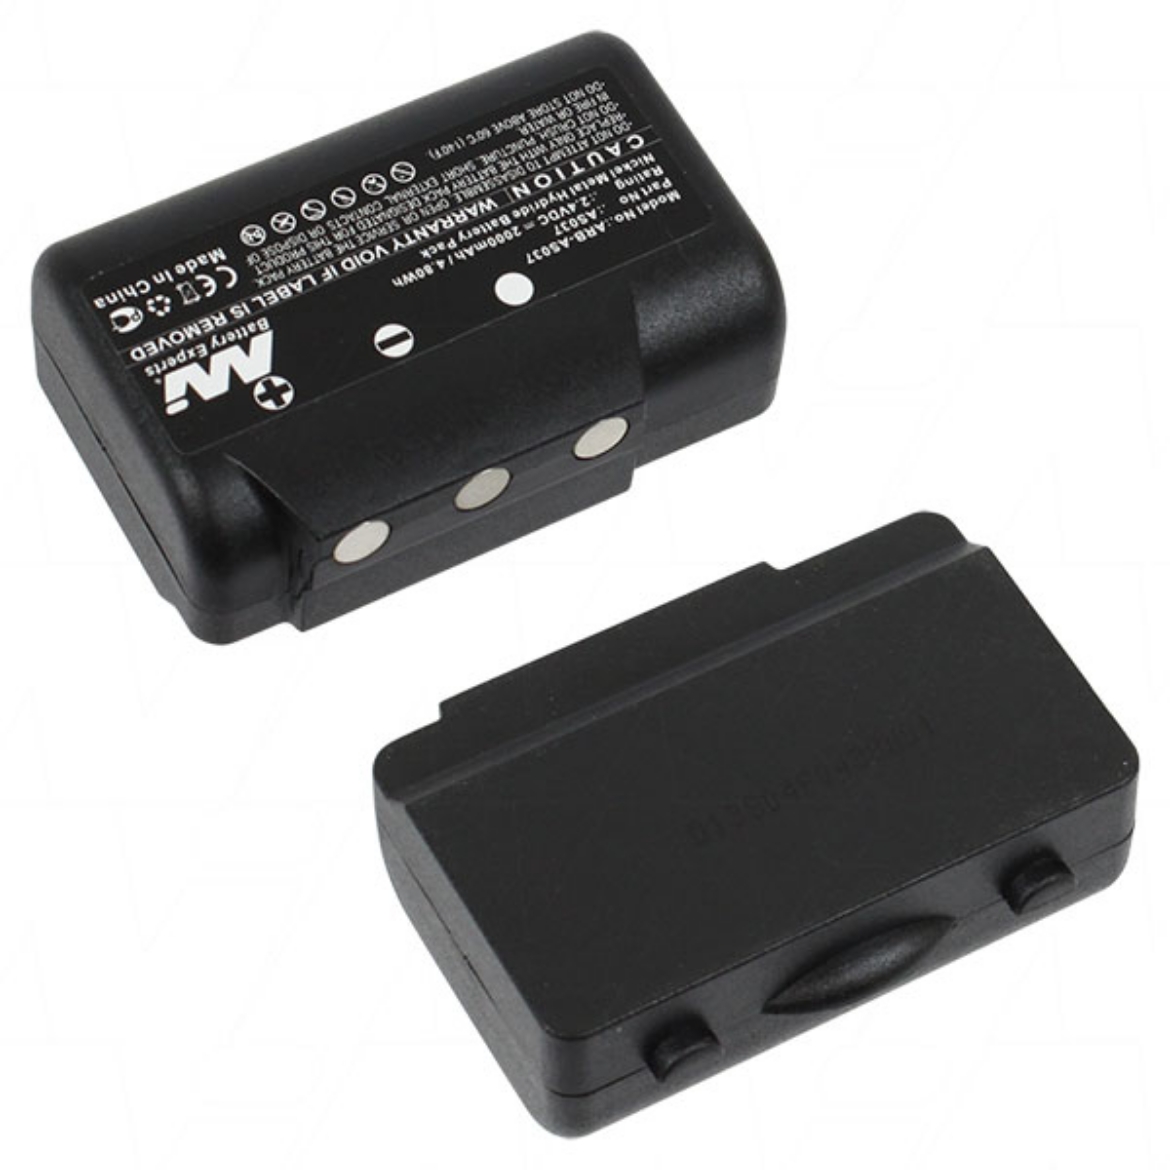 Picture of ARB-AS037 CRANE REMOTE BATTERY 2.4V 2AH 4.8Wh NI-MH